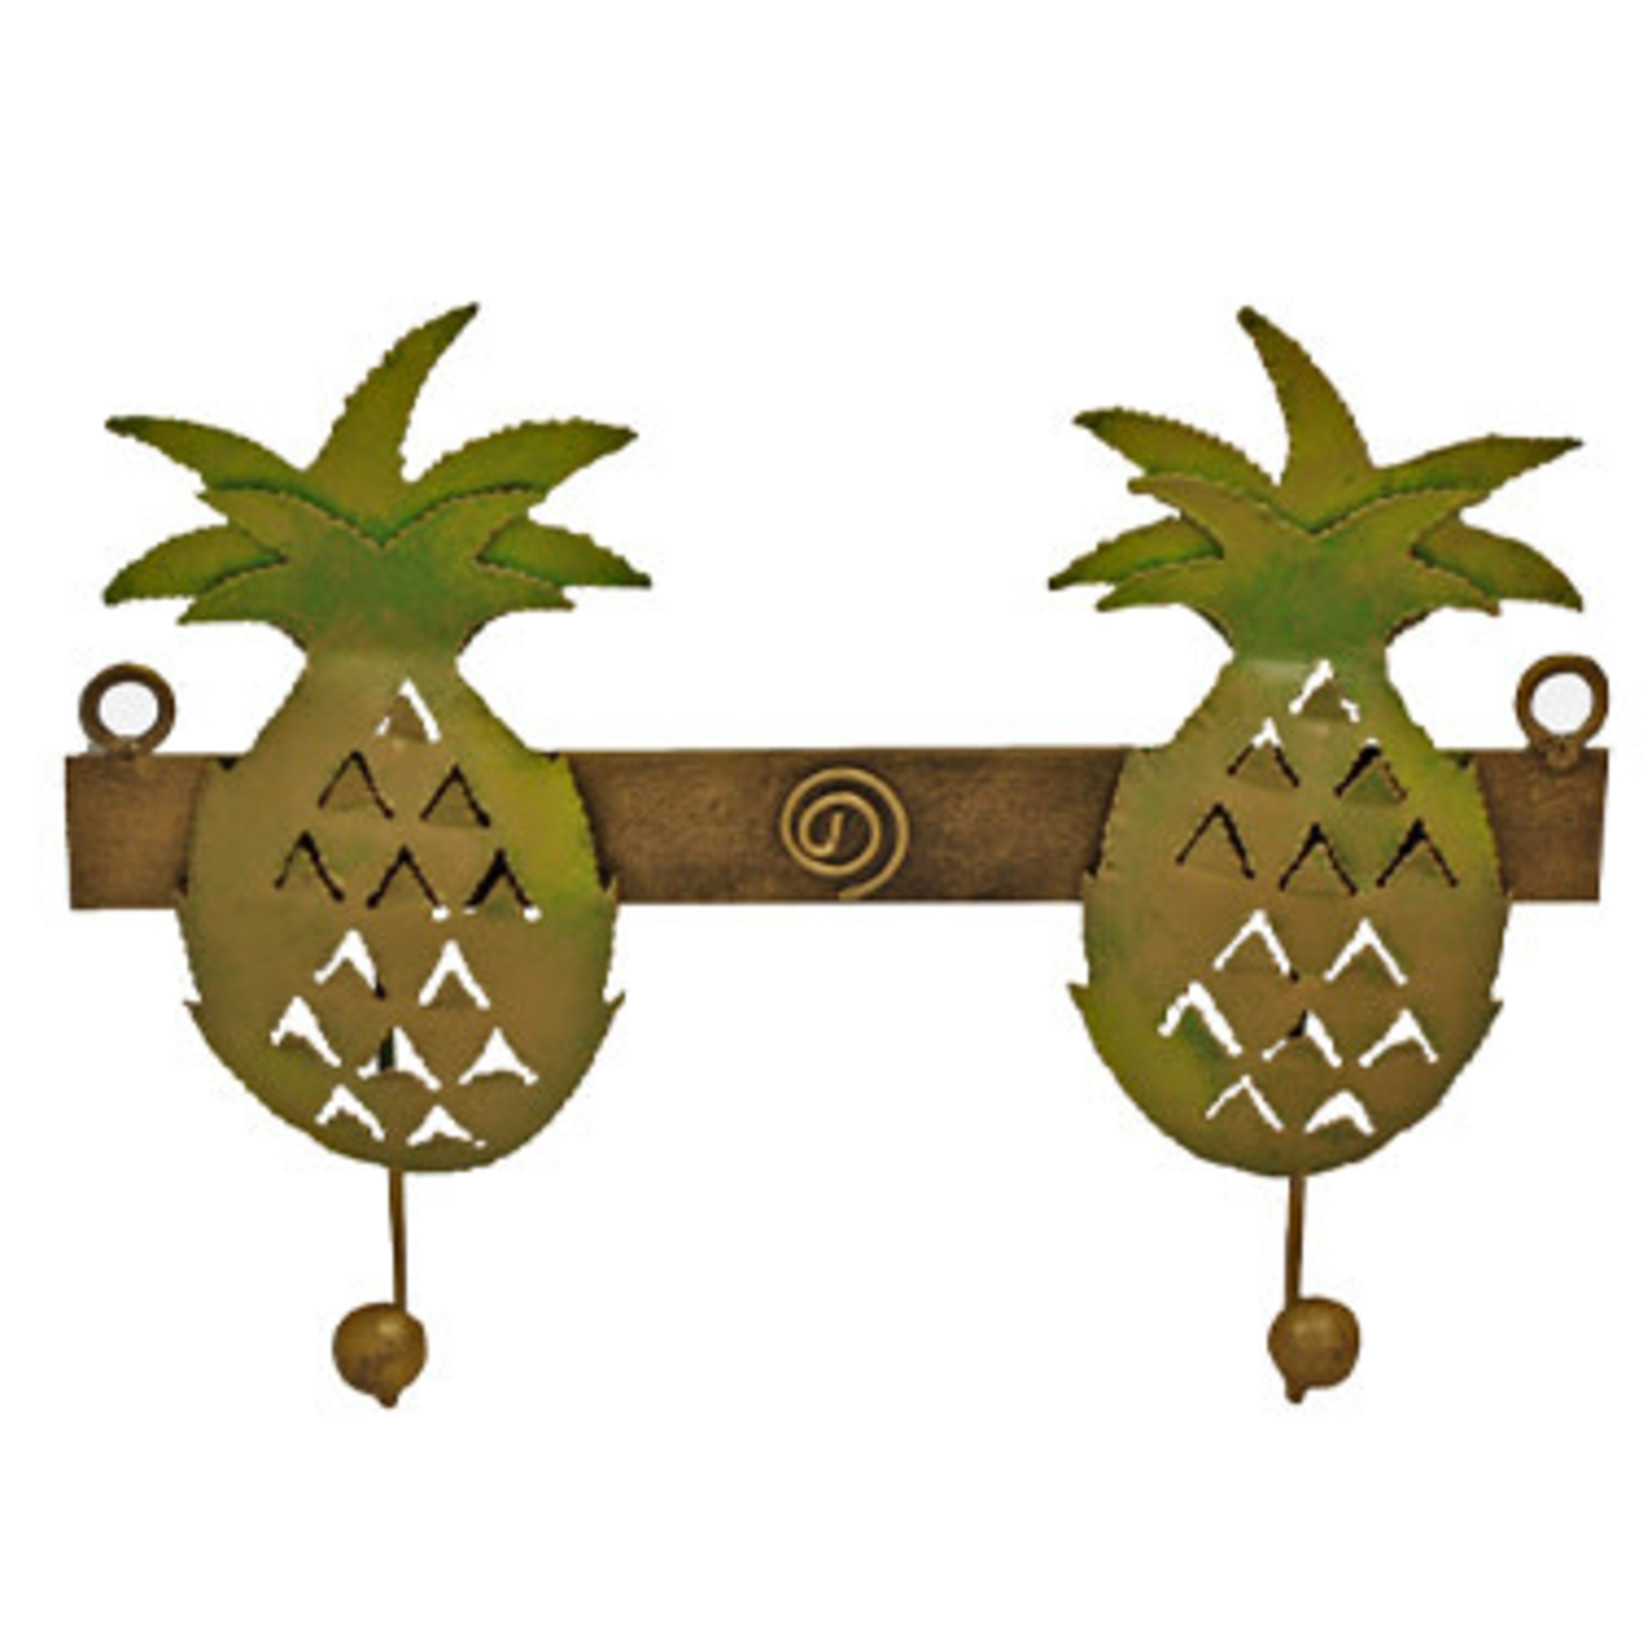 Handmade and Painted Double Iron Hook Pineapple